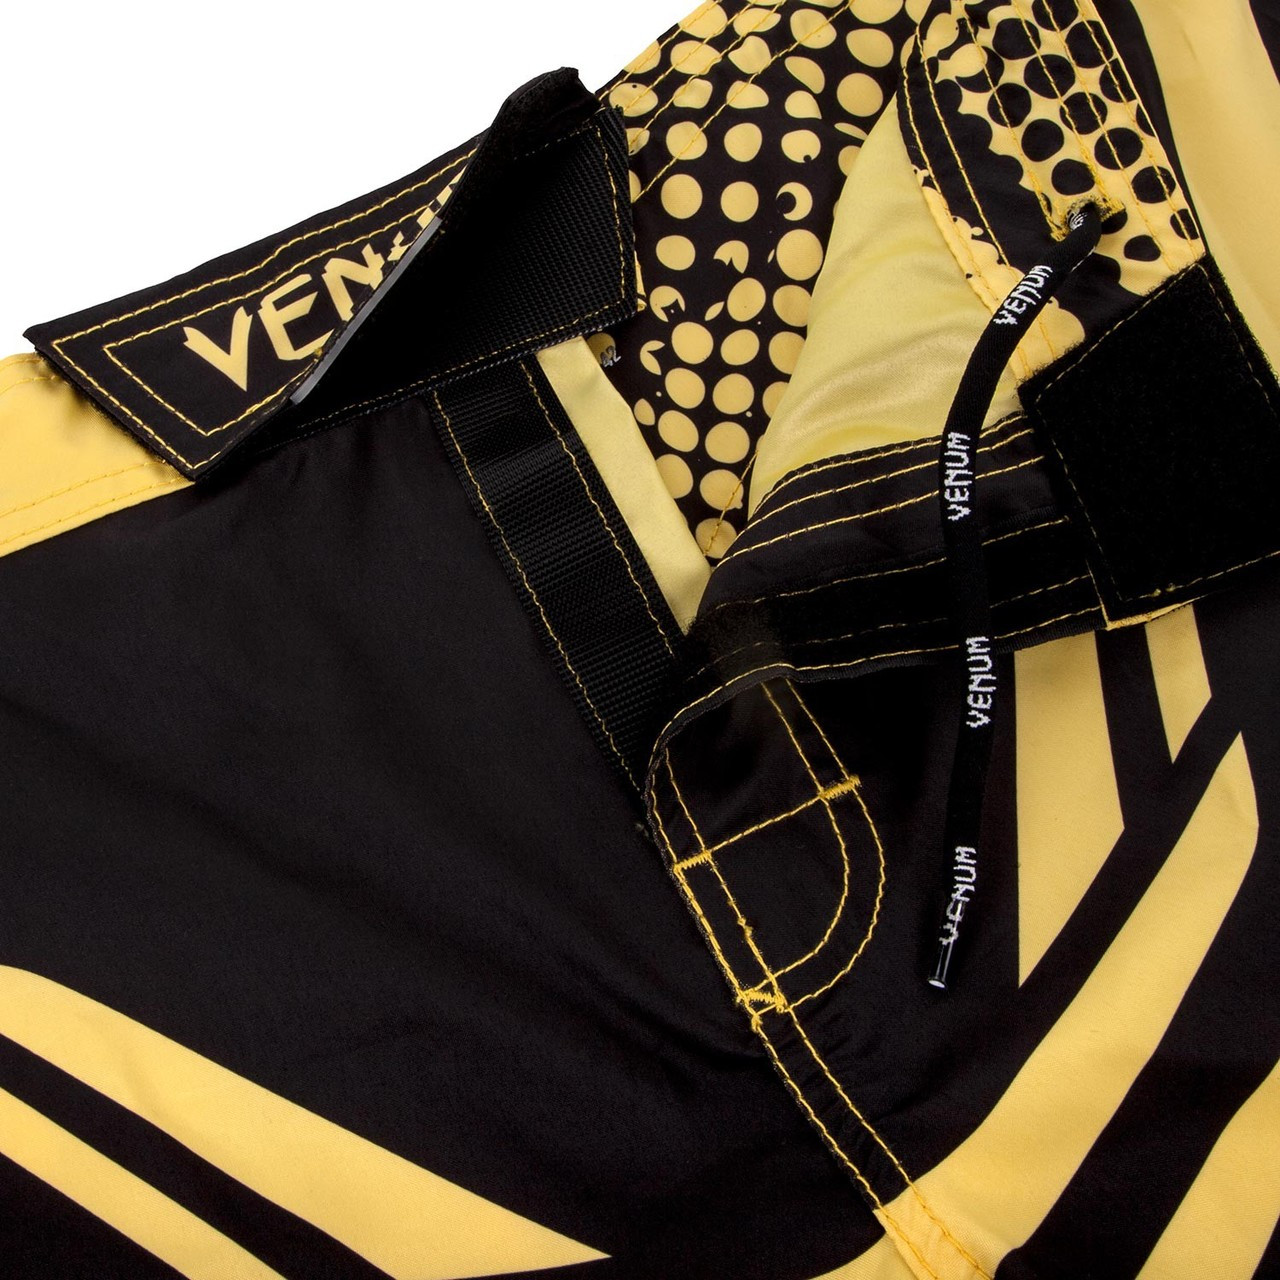 Venum Technical shorts Black and Yellow